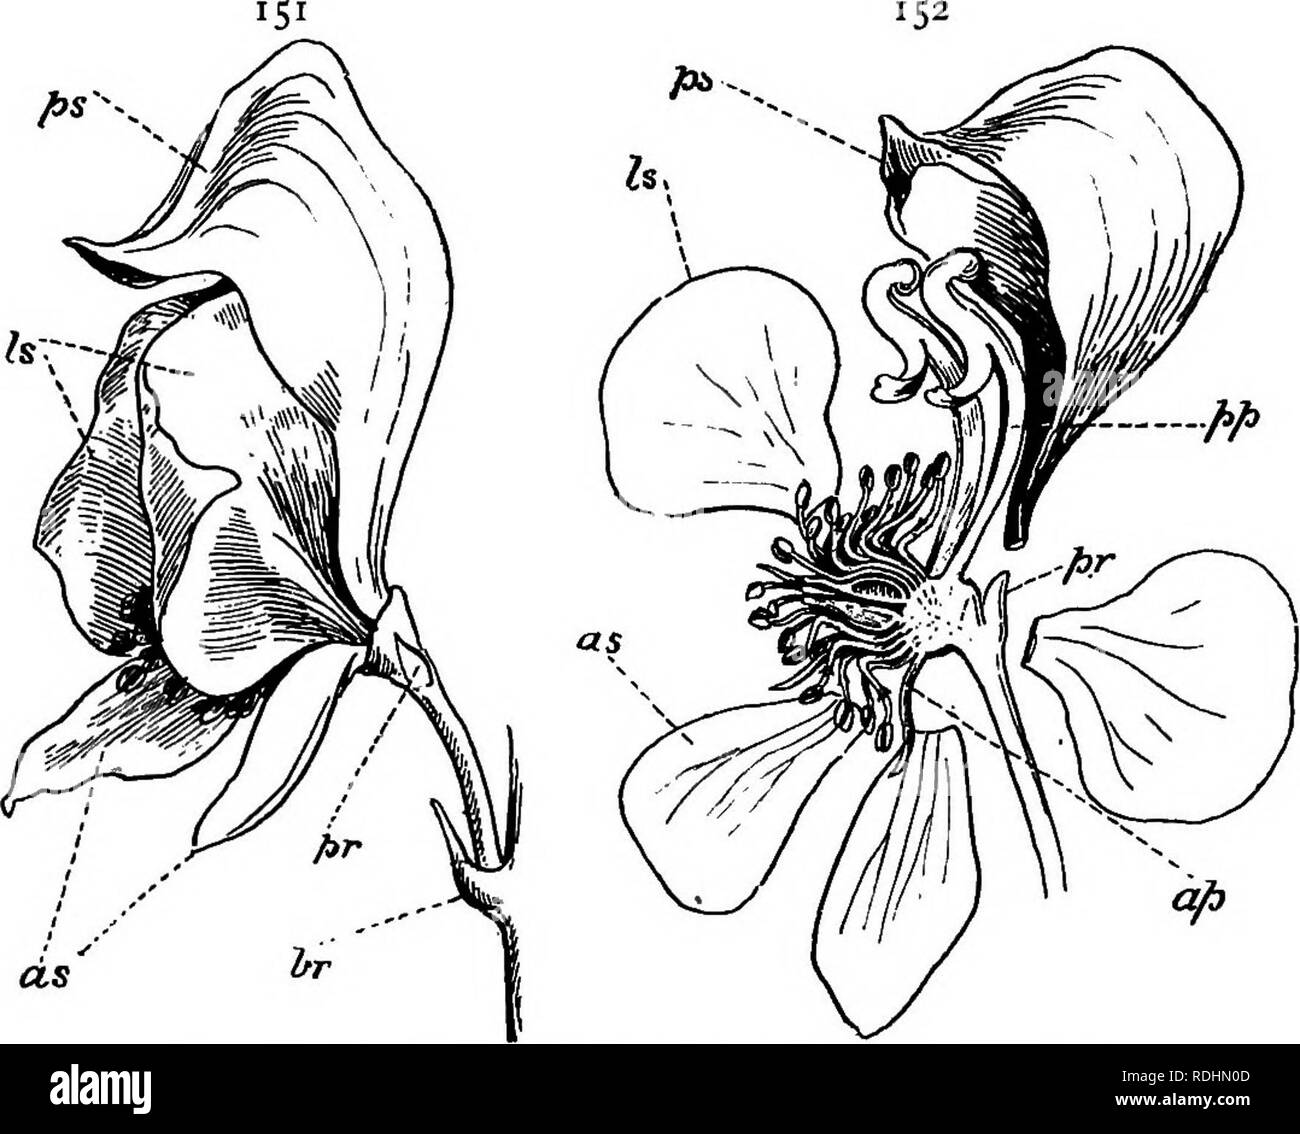 . Elementary botany . Botany. 120 DICOTYLEDONS one (ps) is hood-like; irregular. Petals eight; the two posterior (//) petals are long-clawed nectaries concealed under the large posterior sepal/ the other petals {af) are small or absent. There are three separate carpels, each with many parietal ovules in the ovary. The fruit consists of three follicles. The flower is irregular, and is zygomorphic in a median plane. Pollination.—The flower is proterandrous;. Figs. T5T, TS2.—Flower of Monkshood : ^?-=bract; ^r=prophylls. pollination by its own pollen appears to be thus rendered impossible. Cross- Stock Photo